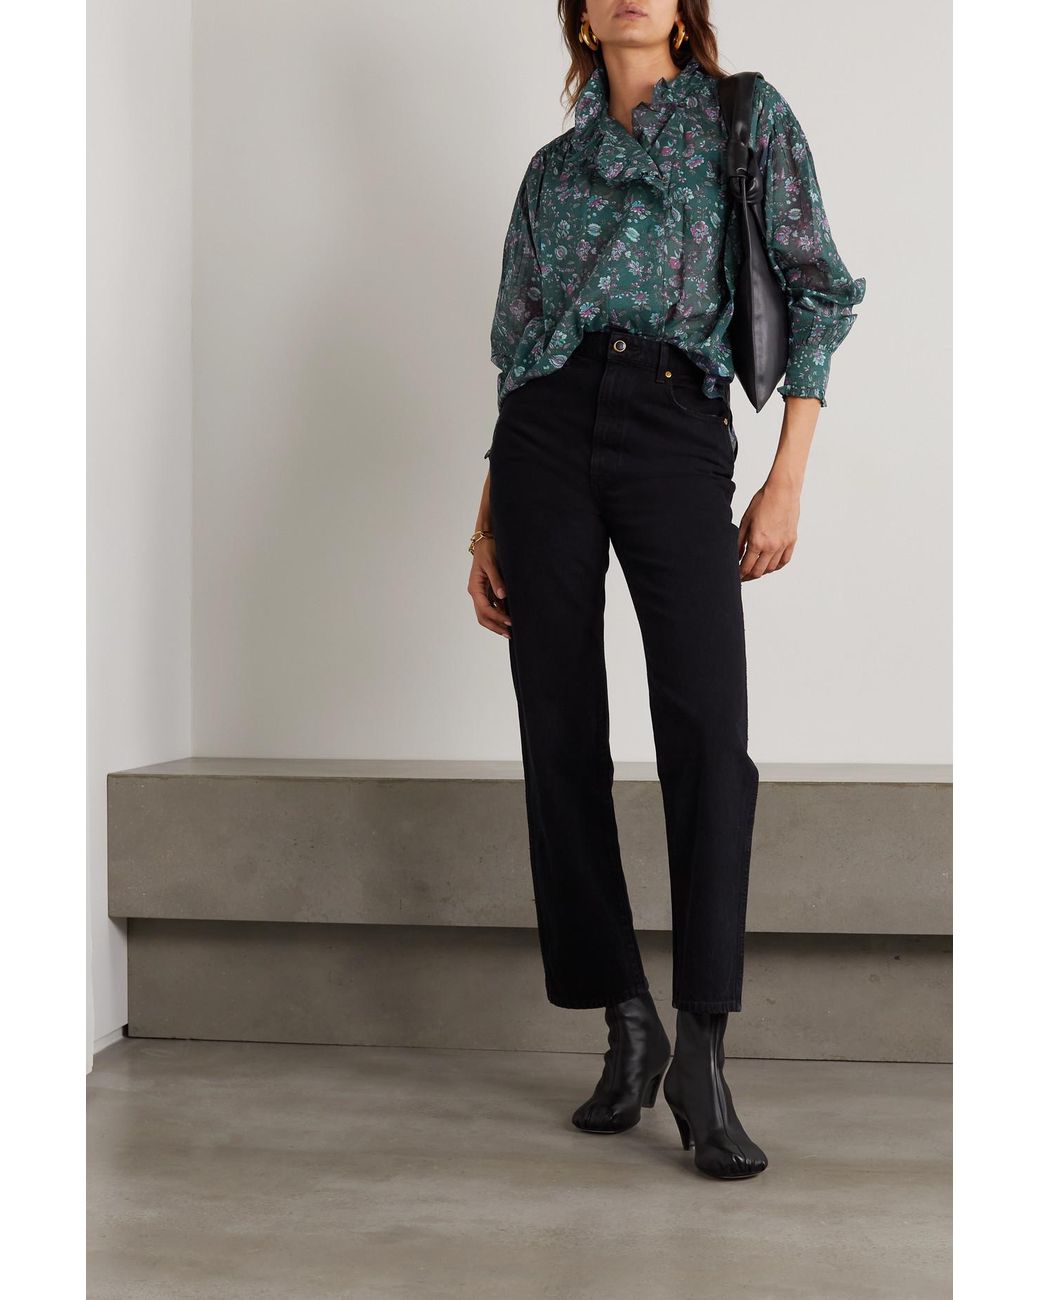 Étoile Isabel Marant Pamias Ruffled Floral-print Cotton-voile Blouse in  Green | Lyst